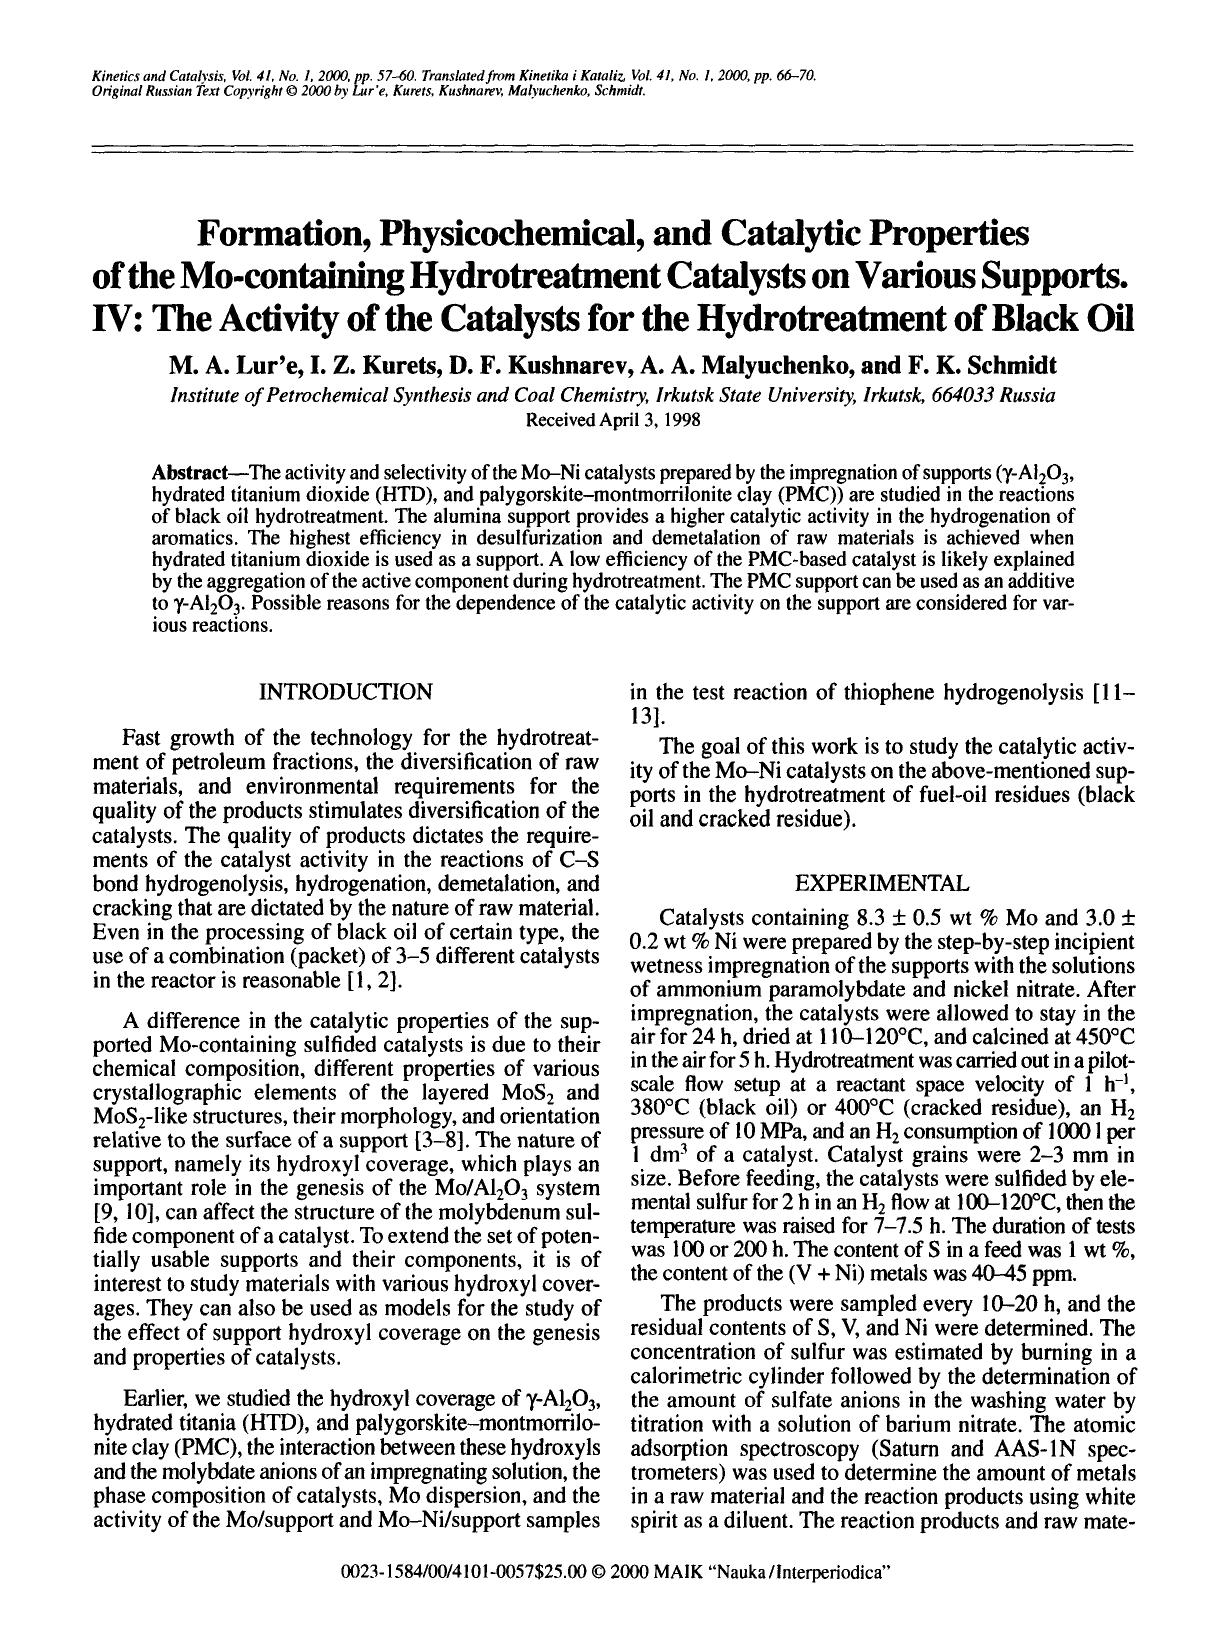 Formation, physicochemical, and catalytic properties of the Mo-containing hydrotreatment catalysts on various supports. IV: The activity of the catalysts for the hydrotreatment of black oil by Unknown